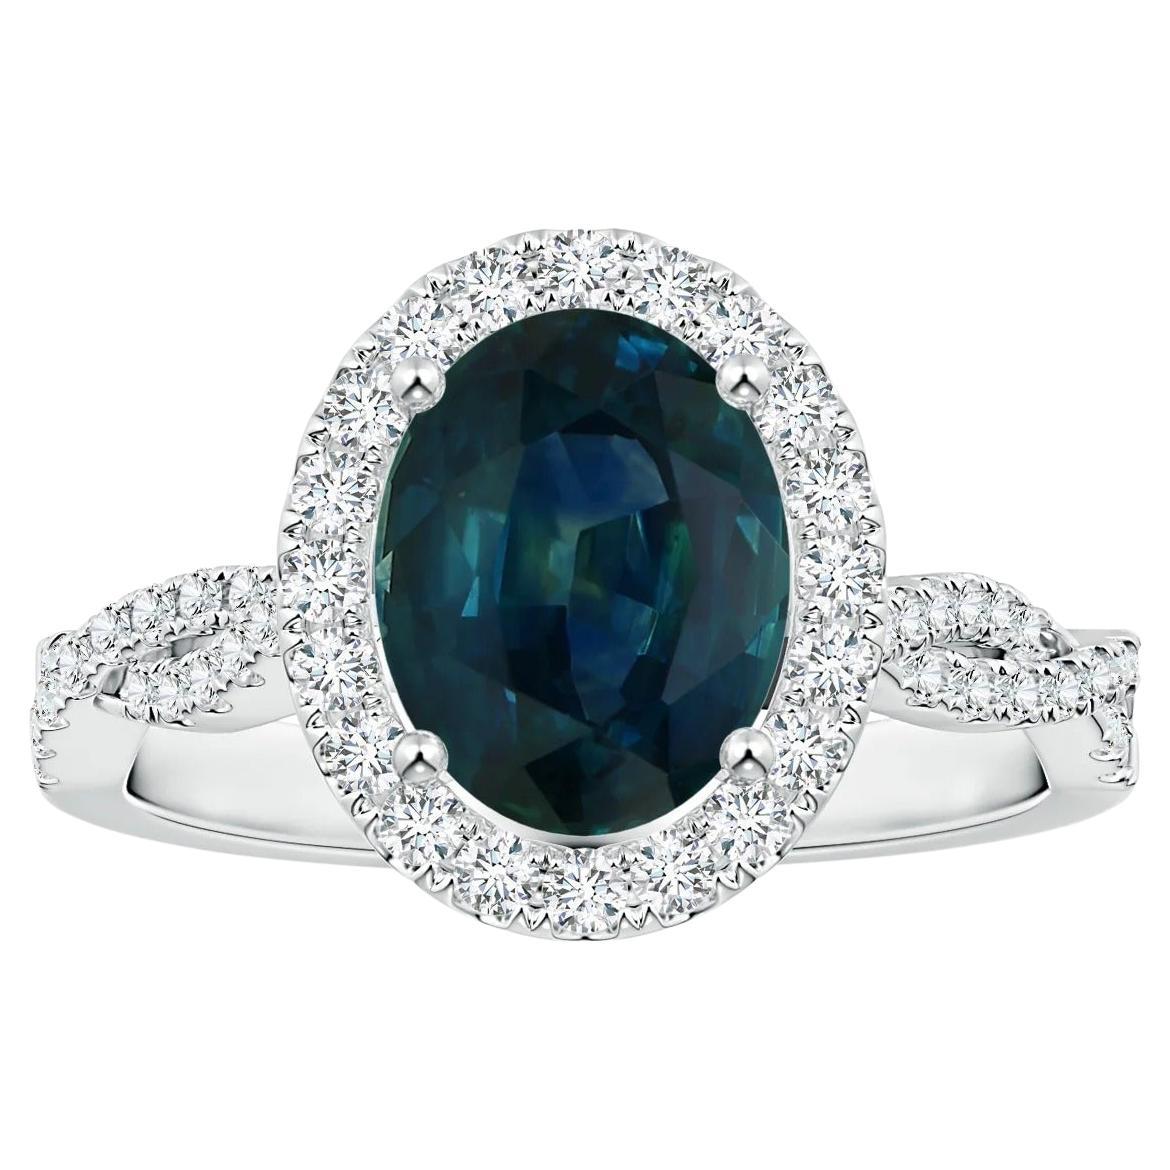 For Sale:  ANGARA GIA Certified Natural Teal Sapphire Diamond Shank Ring in White Gold